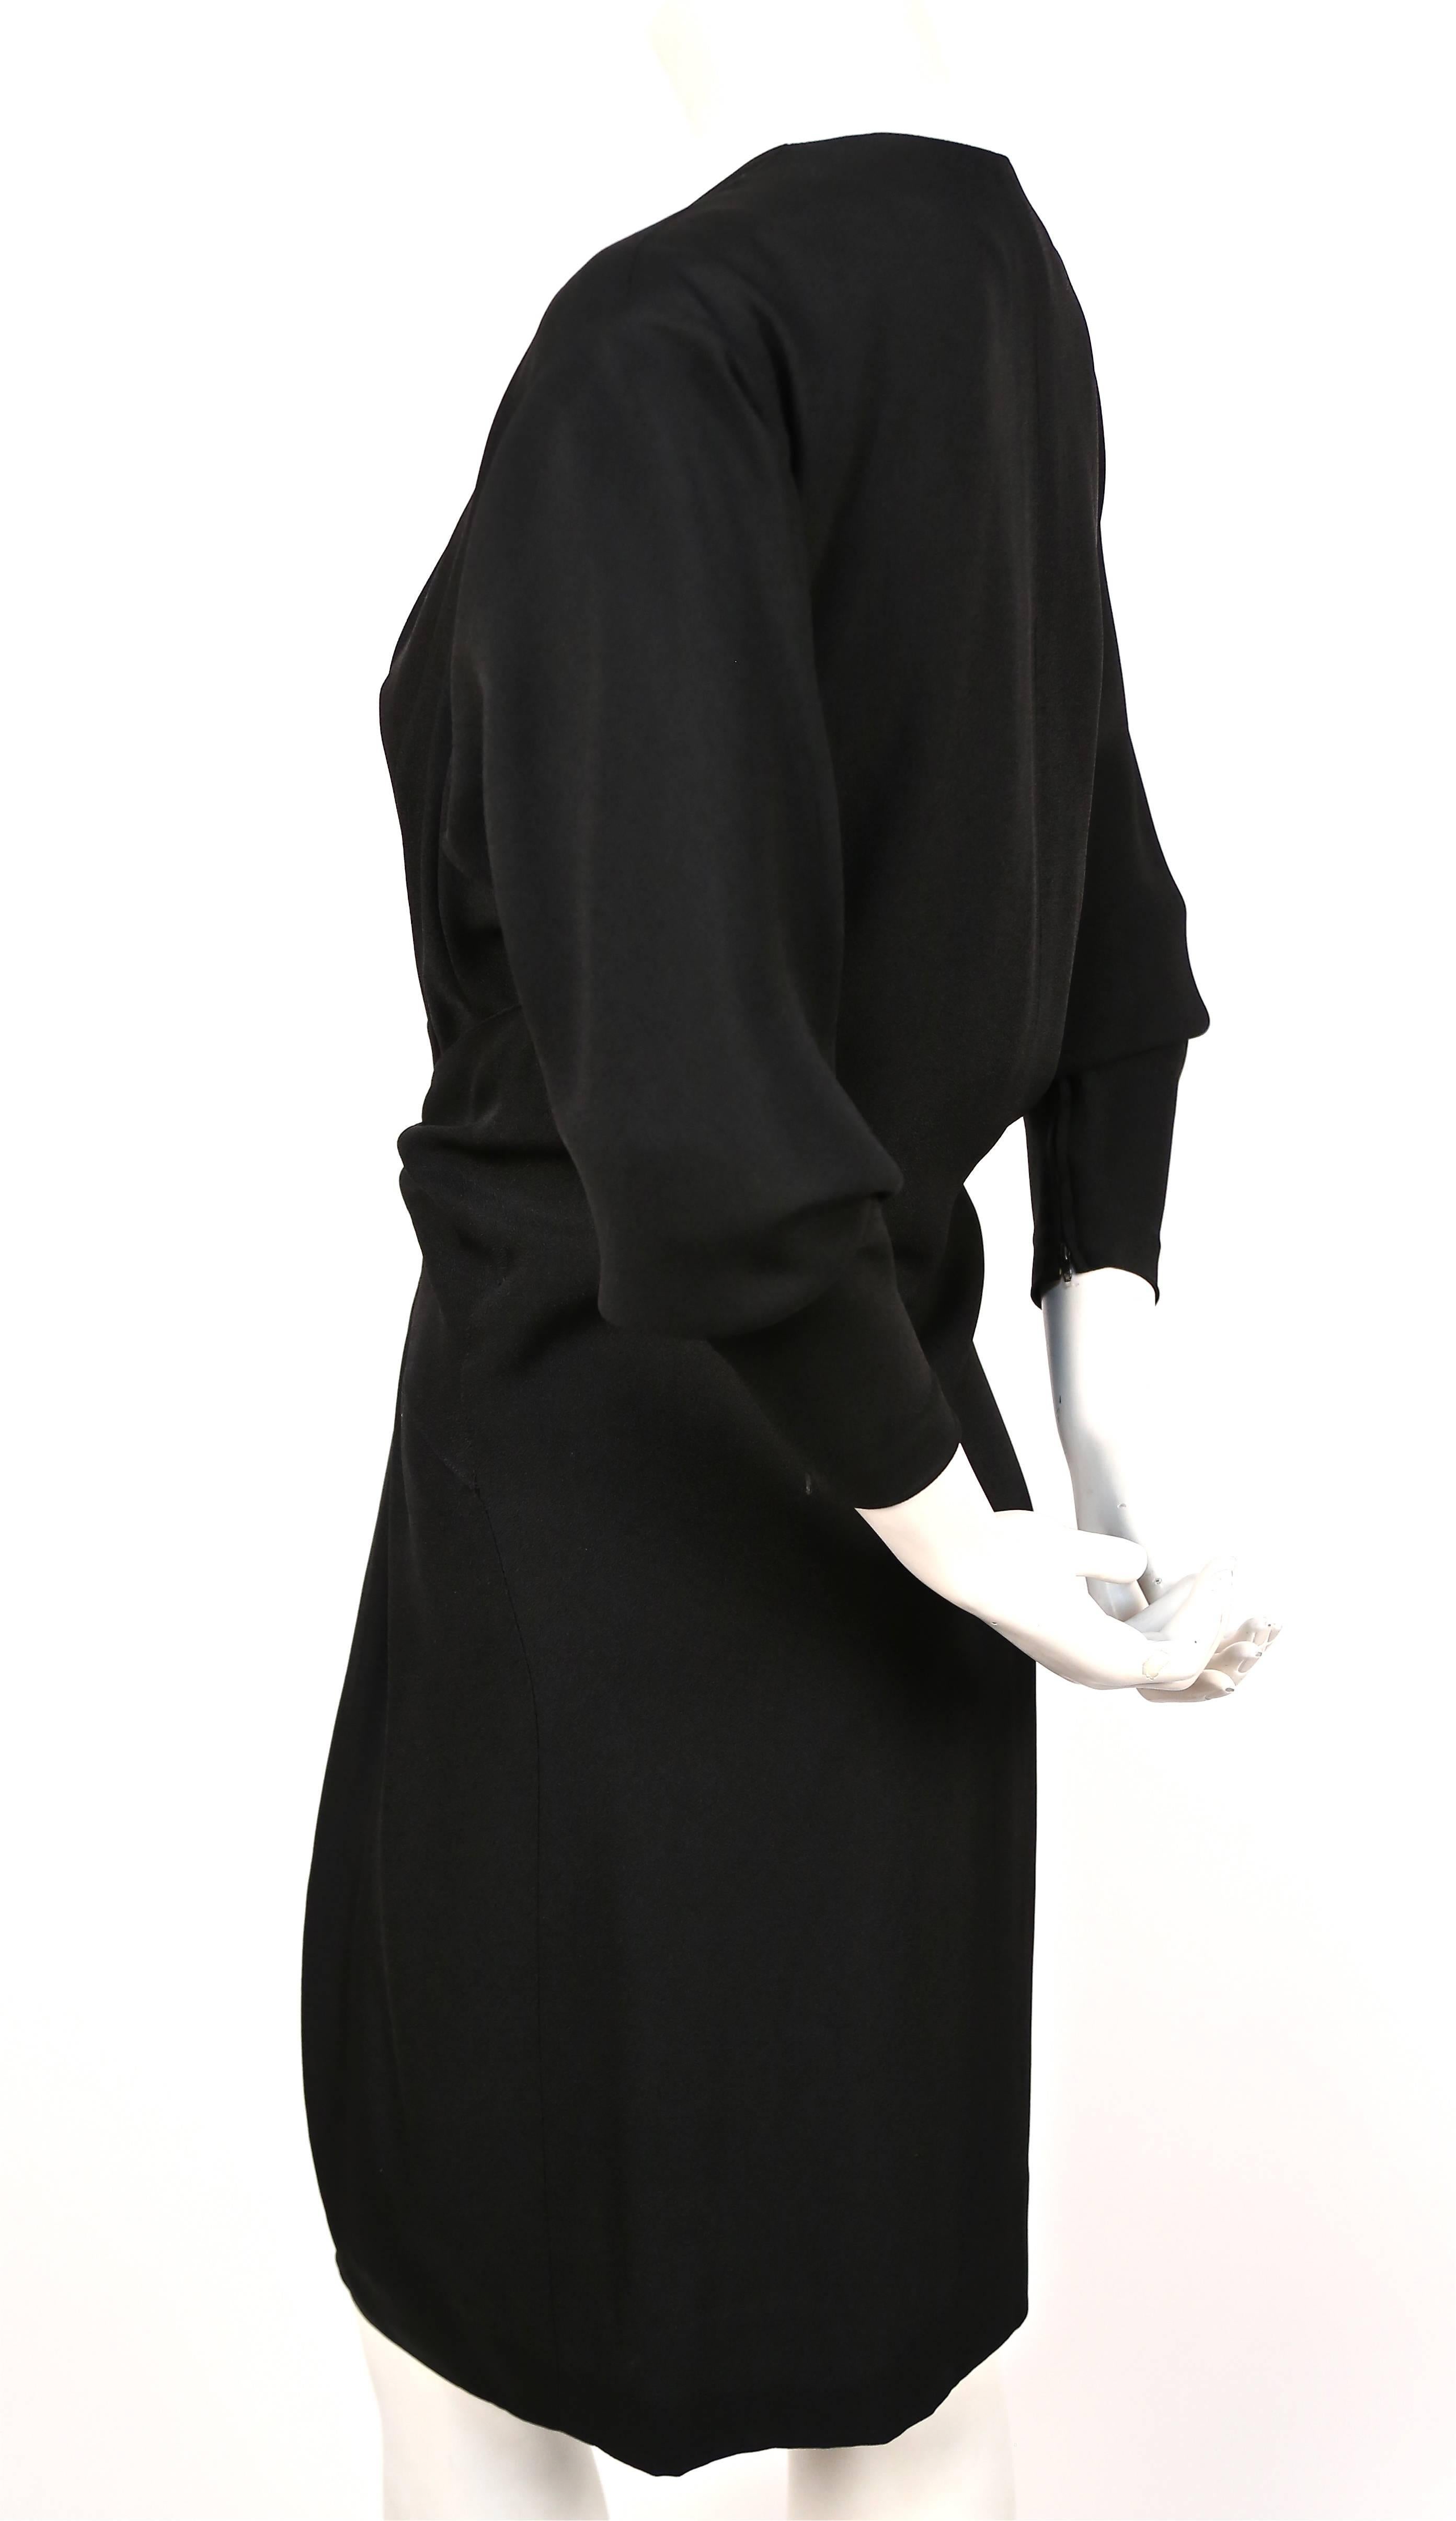 Black crepe dress with plunging neckline and draped waist from Yves Saint Laurent dating to the late 1970's.  Exact dress as seen on Julia Roberts at the 2010 Golden Globe awards. Dress best fits a size 6. Bust measures approximately: shoulder 16